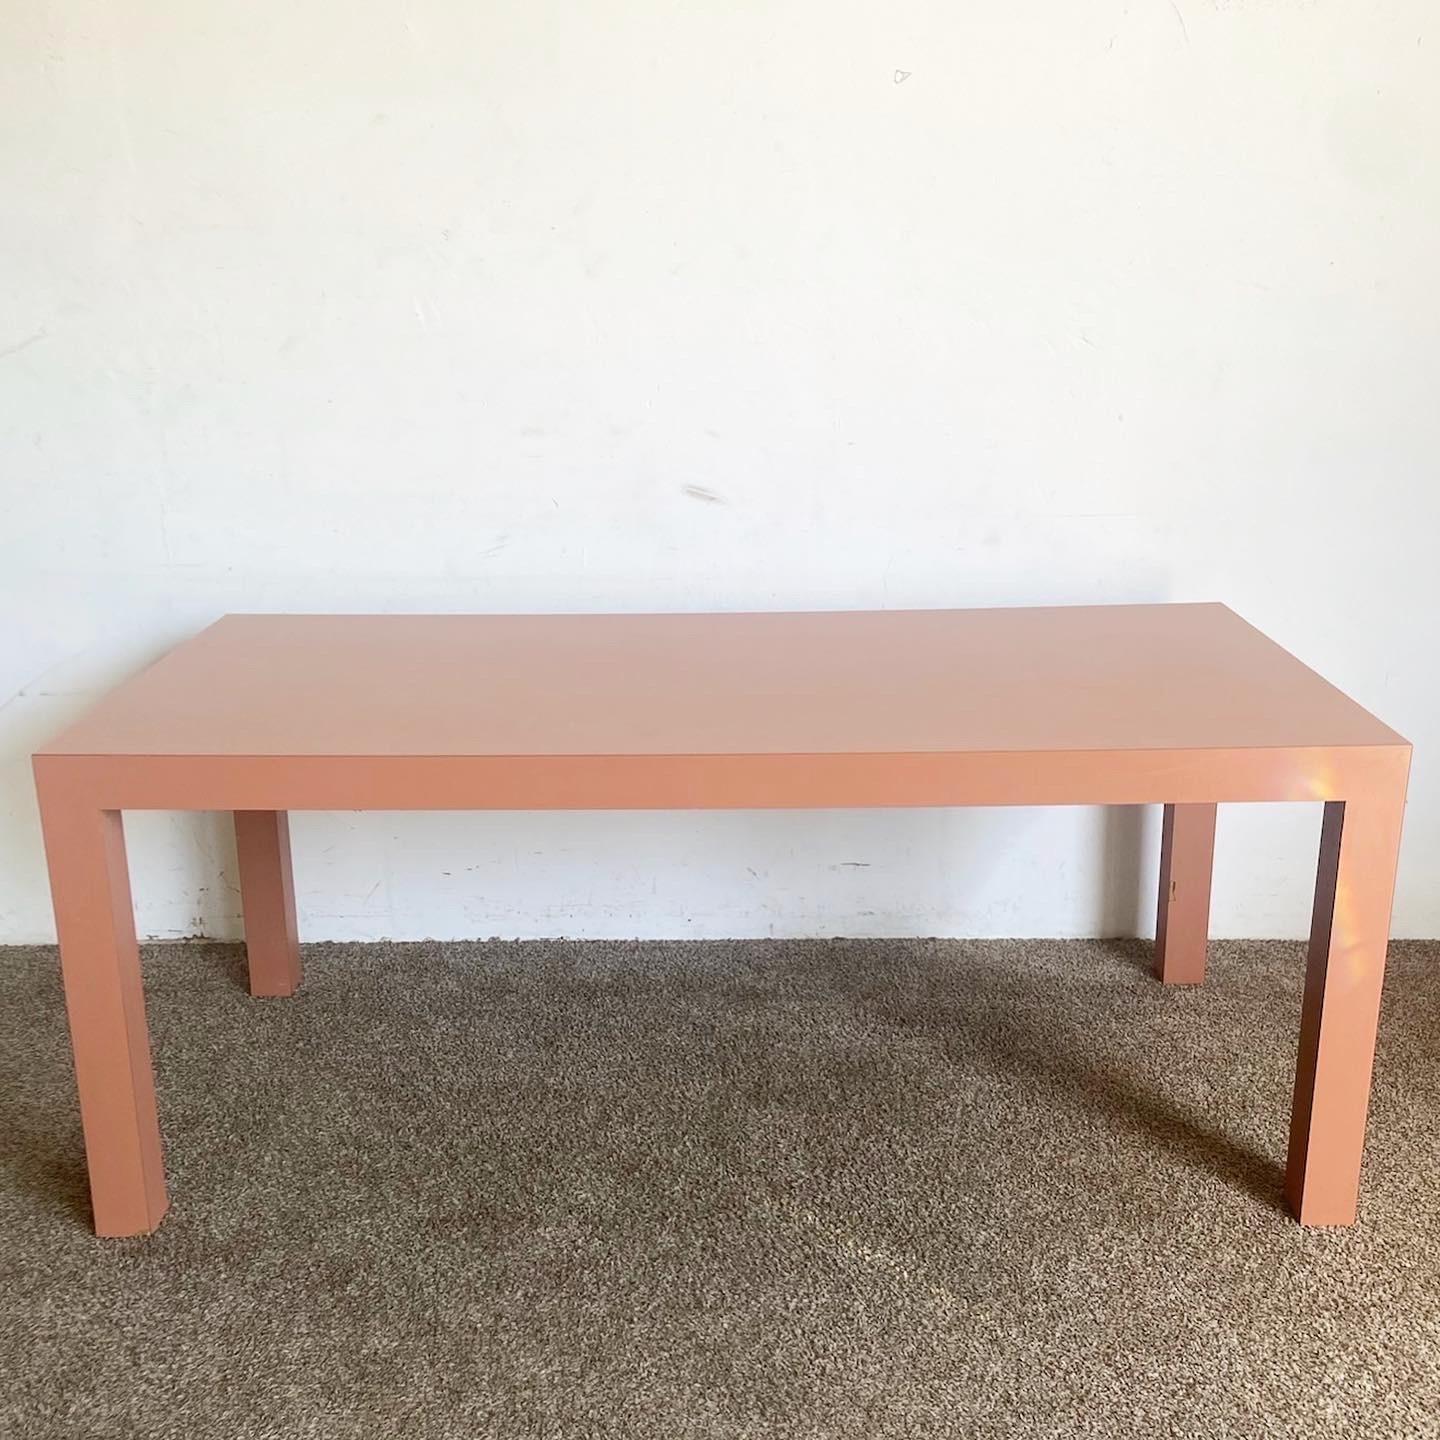 Elevate your dining experience with this Postmodern Salmon Matte Laminate Parsons Dining Table. Its clean lines and bold salmon color make it a unique yet versatile piece for any modern or postmodern setting.
Some wear to the legs and marks to the